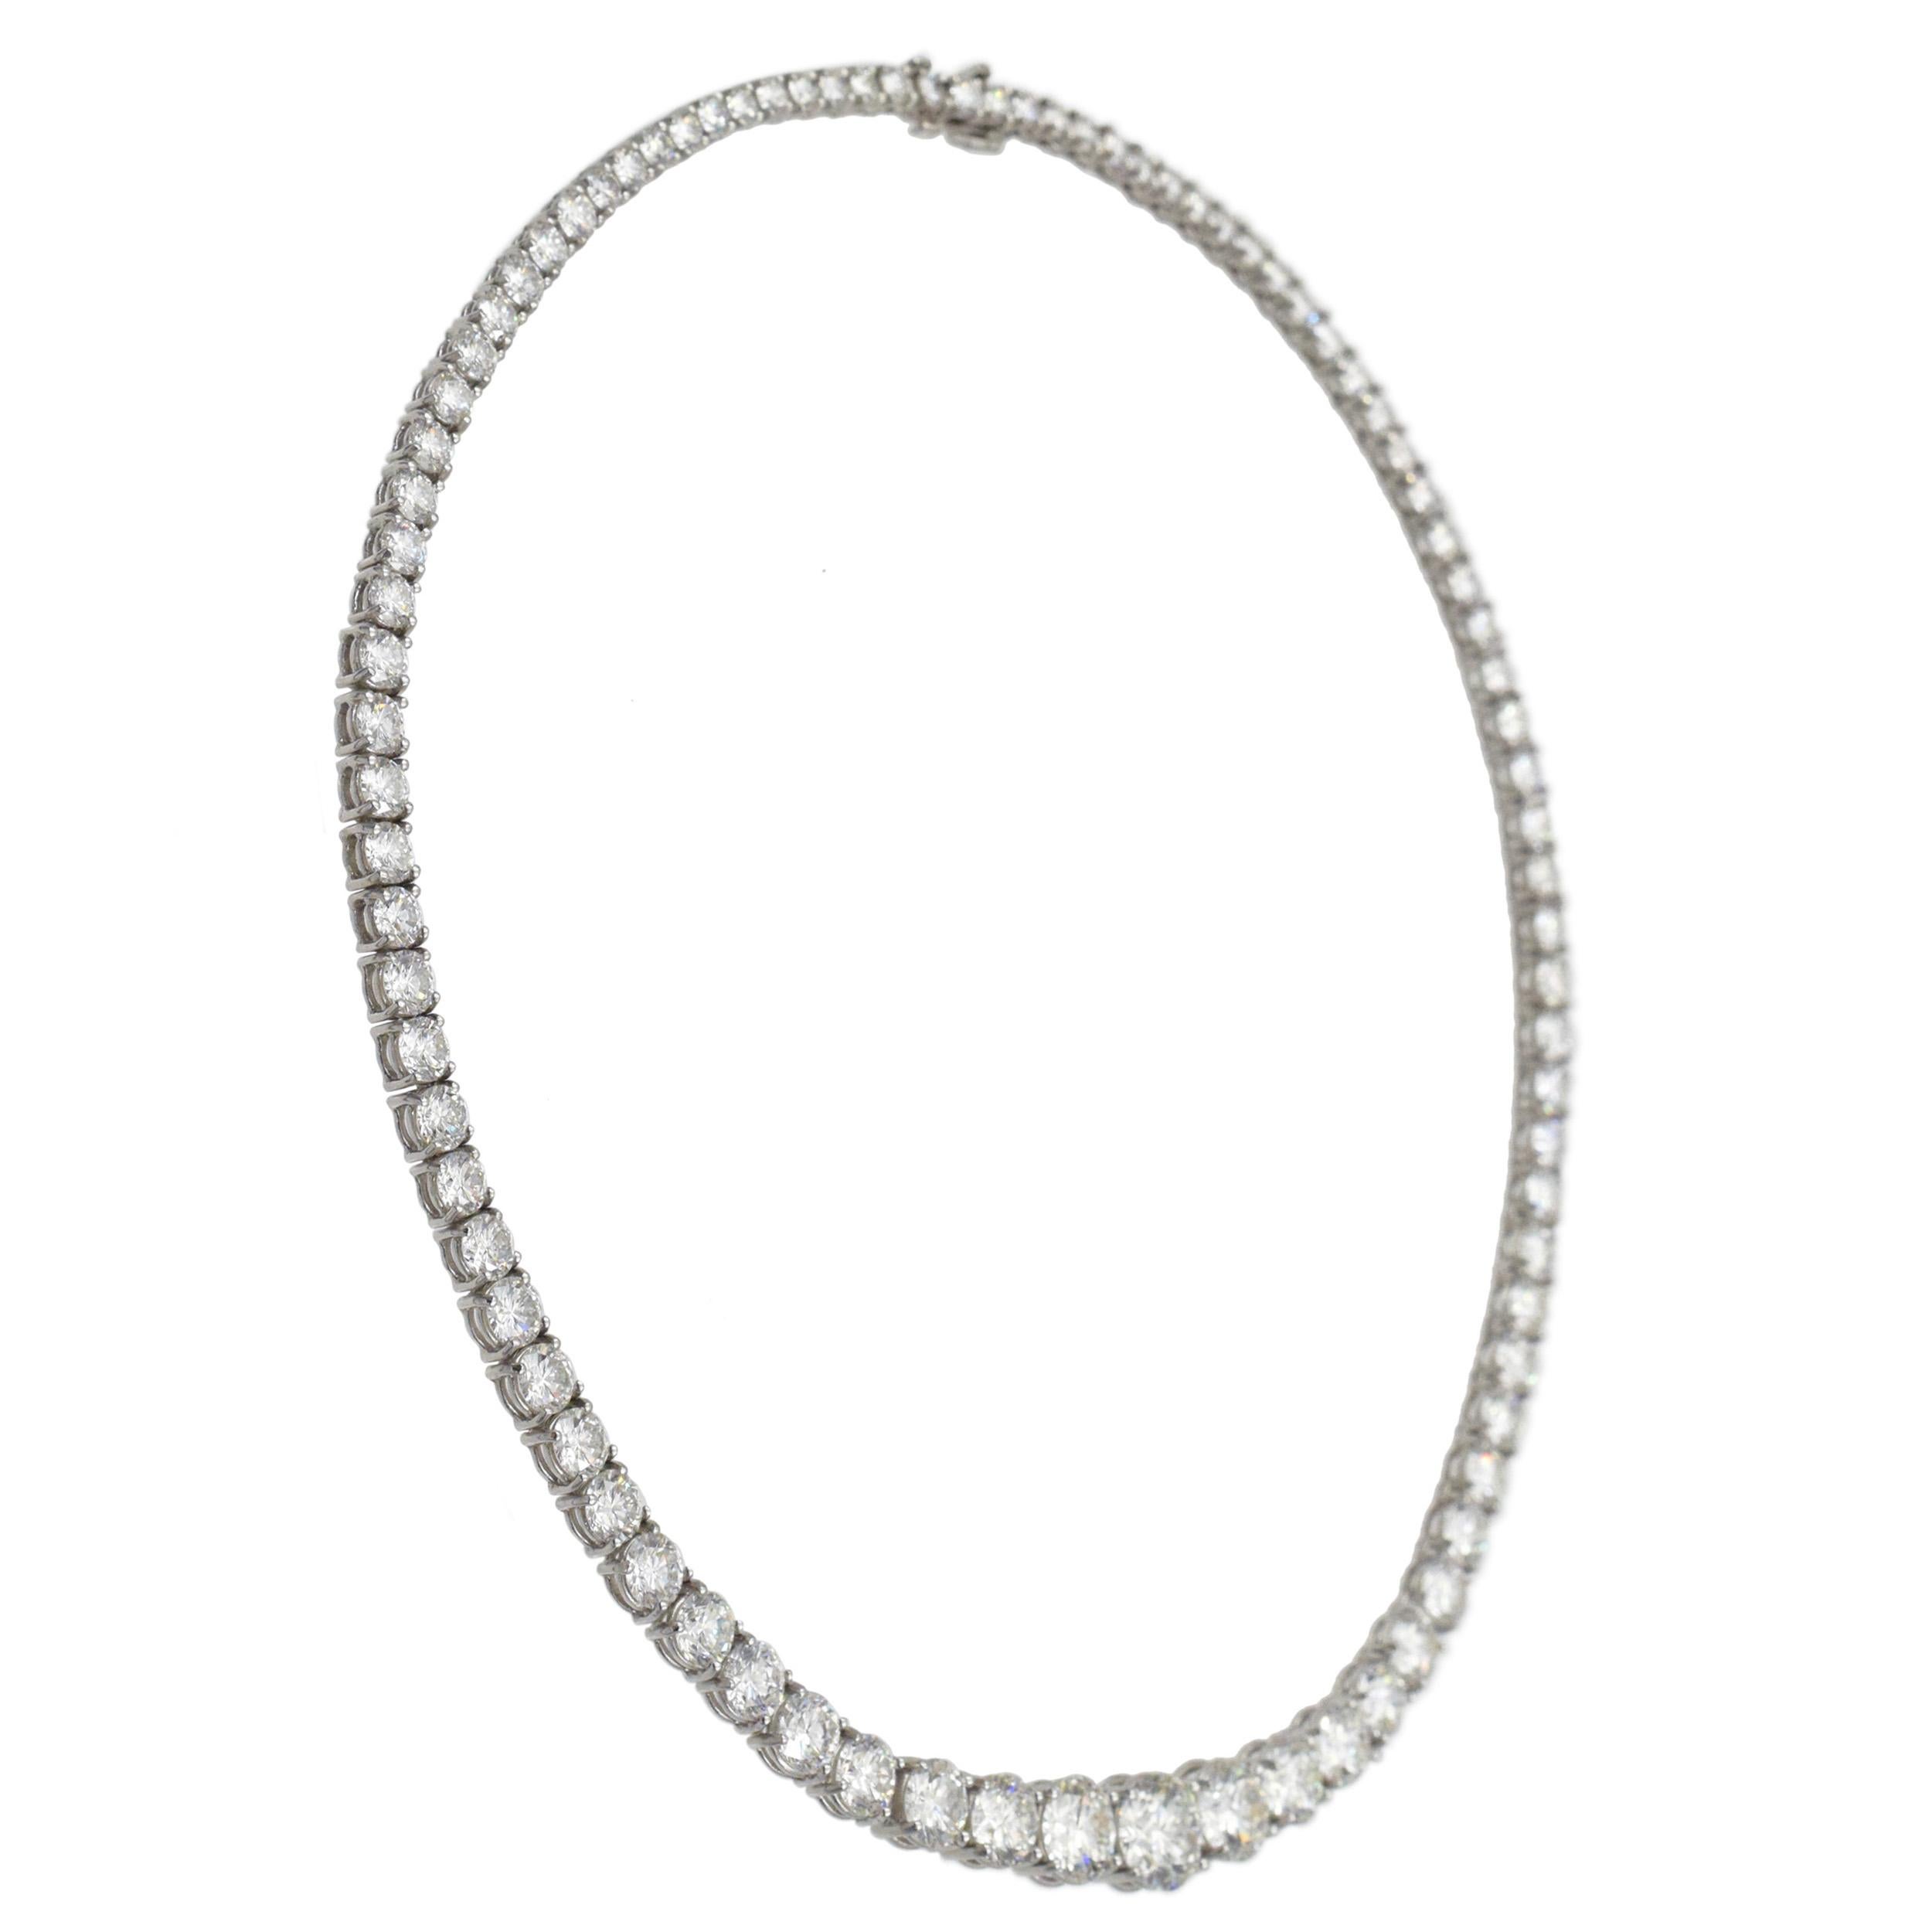 Tiffany & Co Platinum and Diamond Riviera Necklace 

This necklace has a round diamond center weighing 2.26 CTs., 2 round diamonds flanking center weighing a total of 2.92 CTs., 86 round diamonds weighing 24.43 CTs. (Color: F-H, VS) all set in